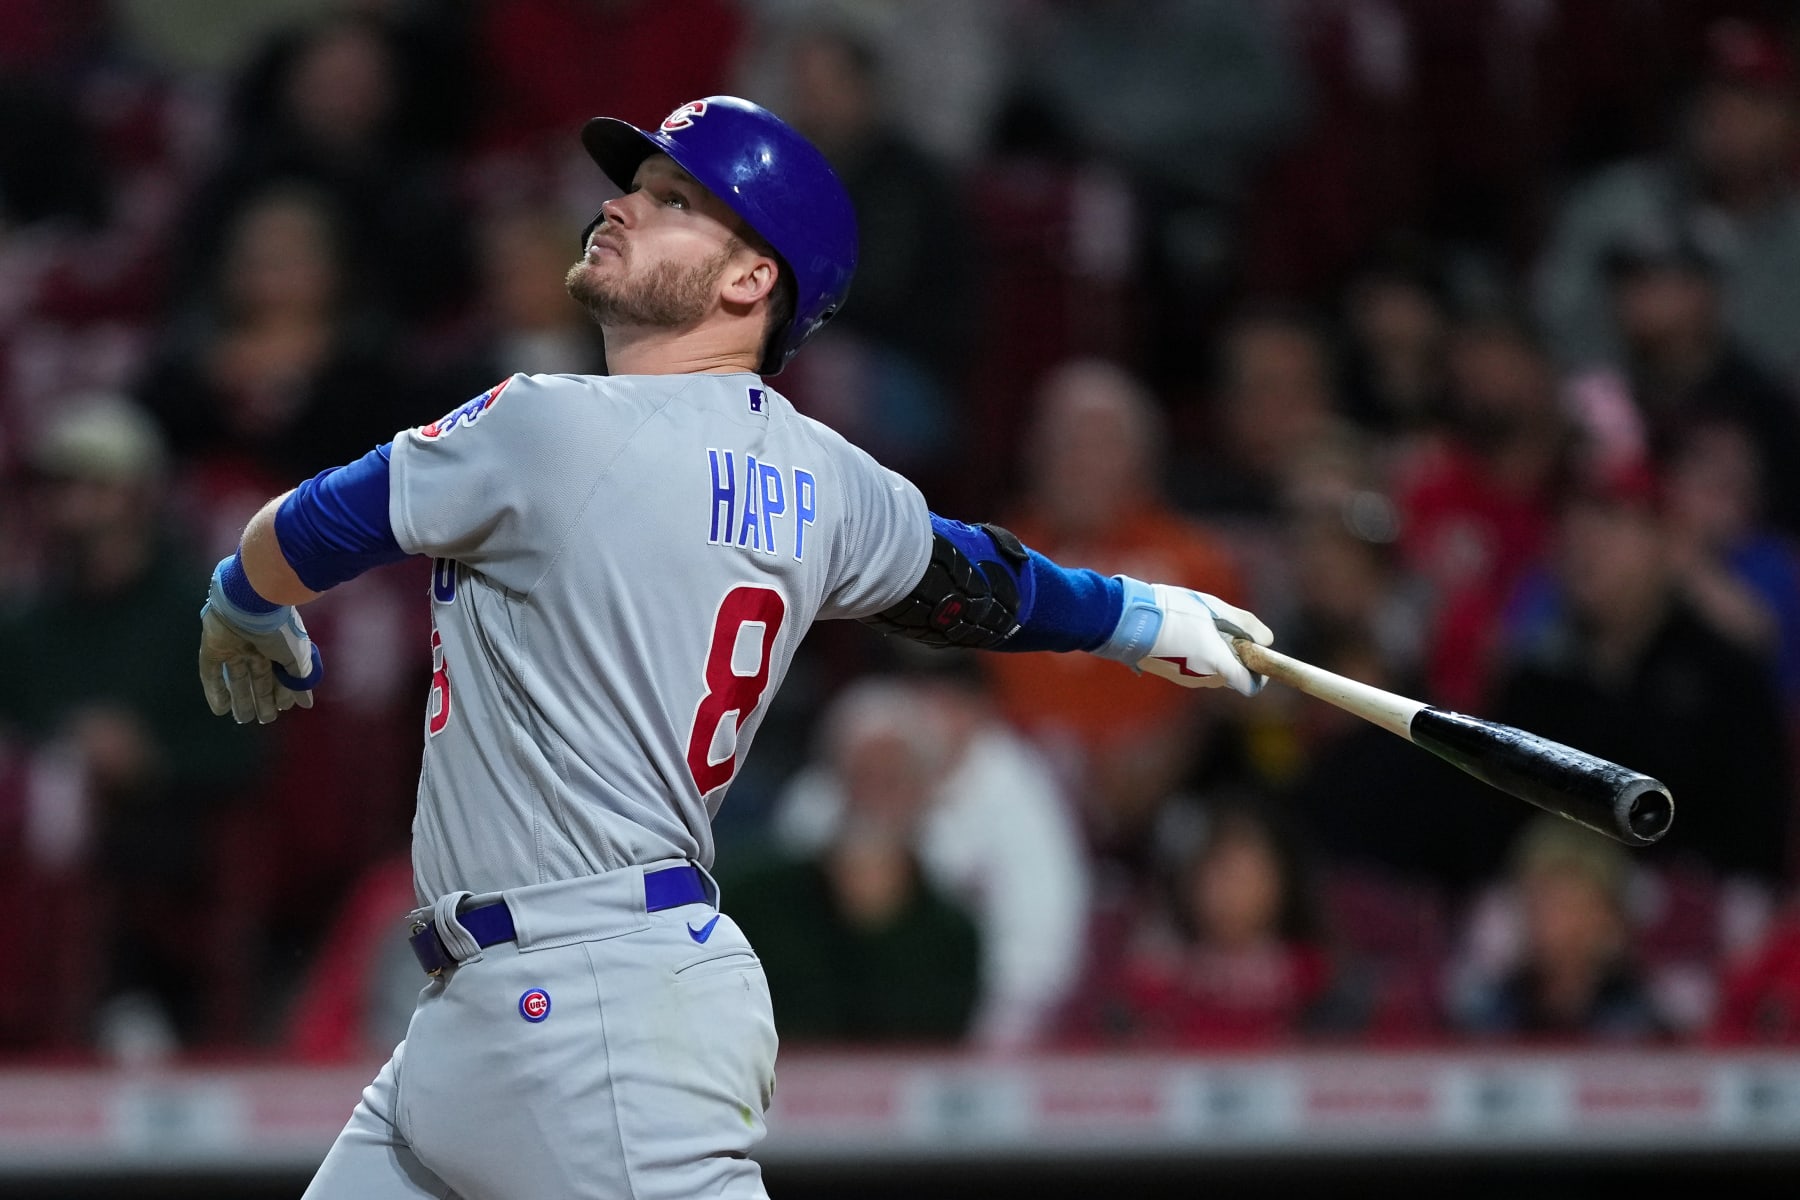 Feinsand: Ian Happ is Cubs' 'Best Trade Chip, Likely to Start 2023